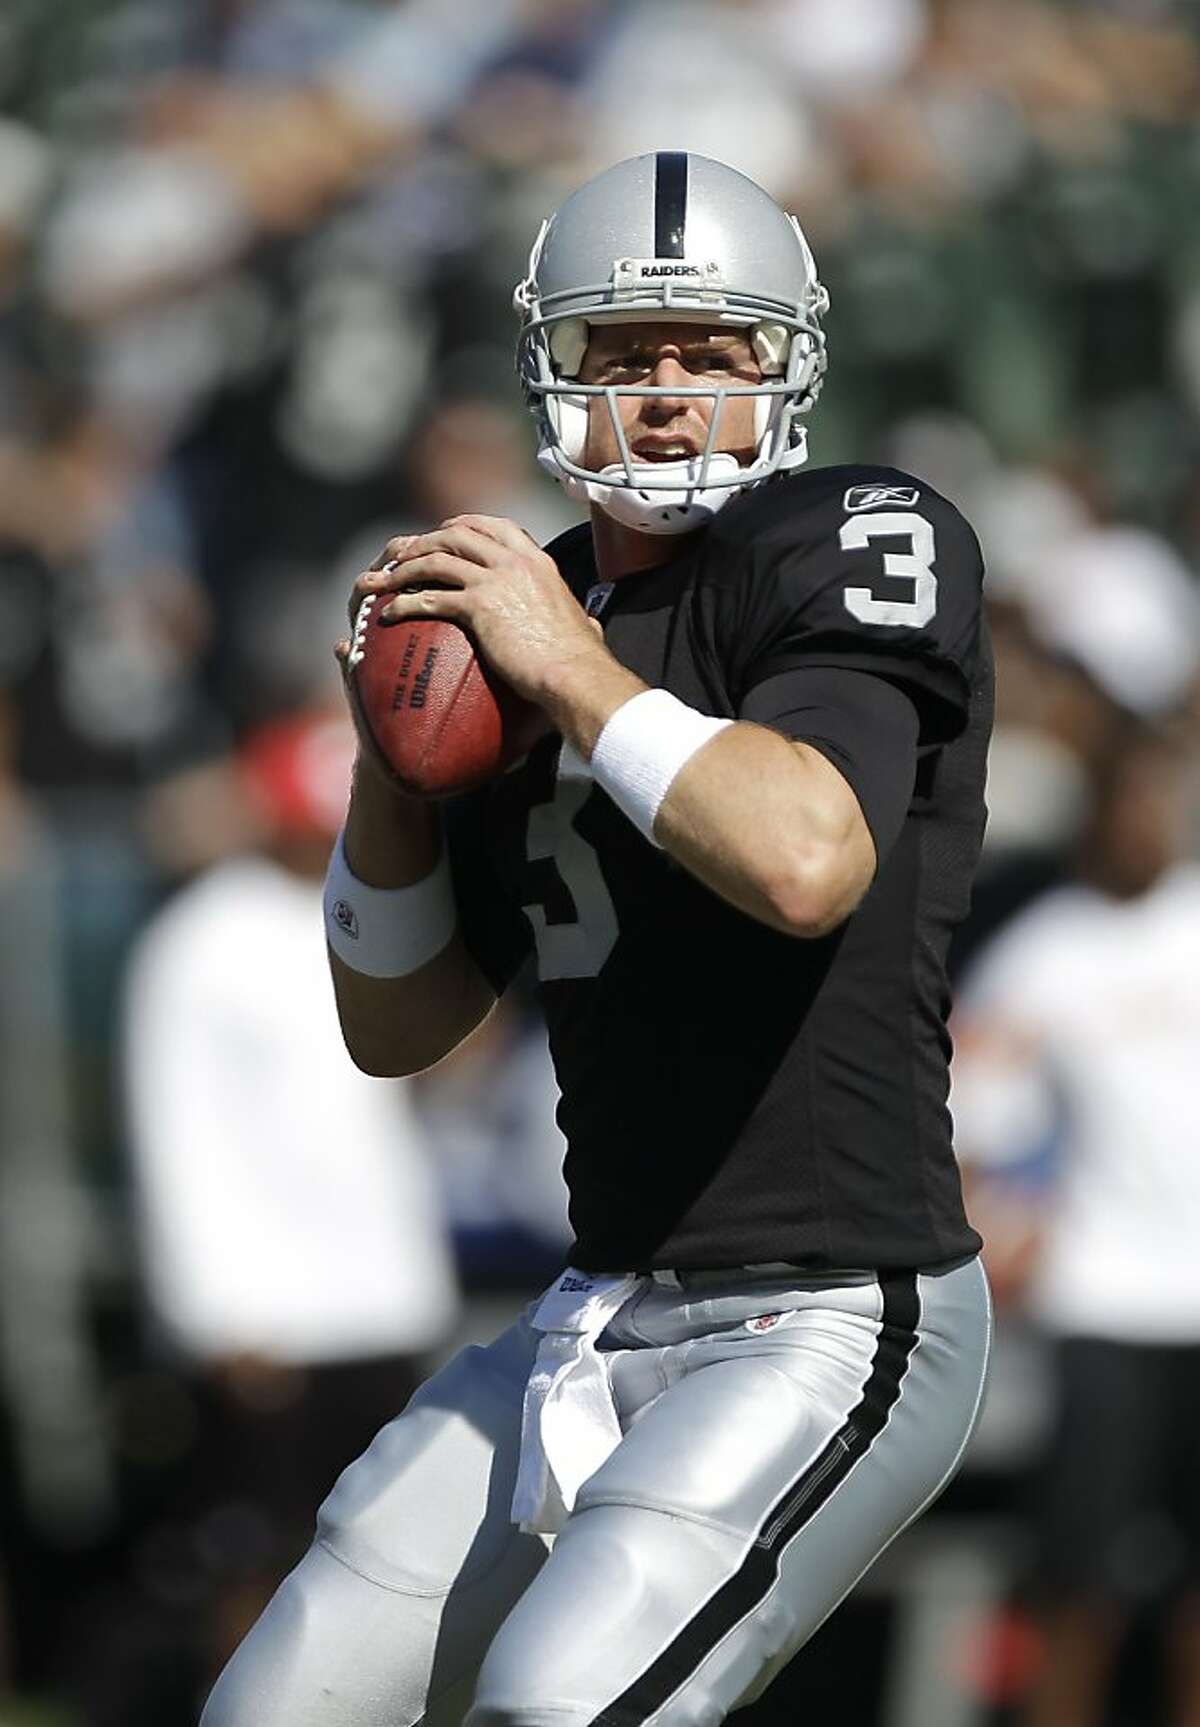 Oakland Raiders quarterback Carson Palmer (3) warms up before an NFL football game against the Kansas City Chiefs in Oakland, Calif., Sunday, Oct. 23, 2011. (AP Photo/Paul Sakuma) Ran on: 11-06-2011 Carson Palmer should have a much better grasp of the Raiders offense in his second game after a bye week break. Ran on: 11-06-2011 Carson Palmer should have a much better grasp of the Raiders offense in his second game after a bye week break.